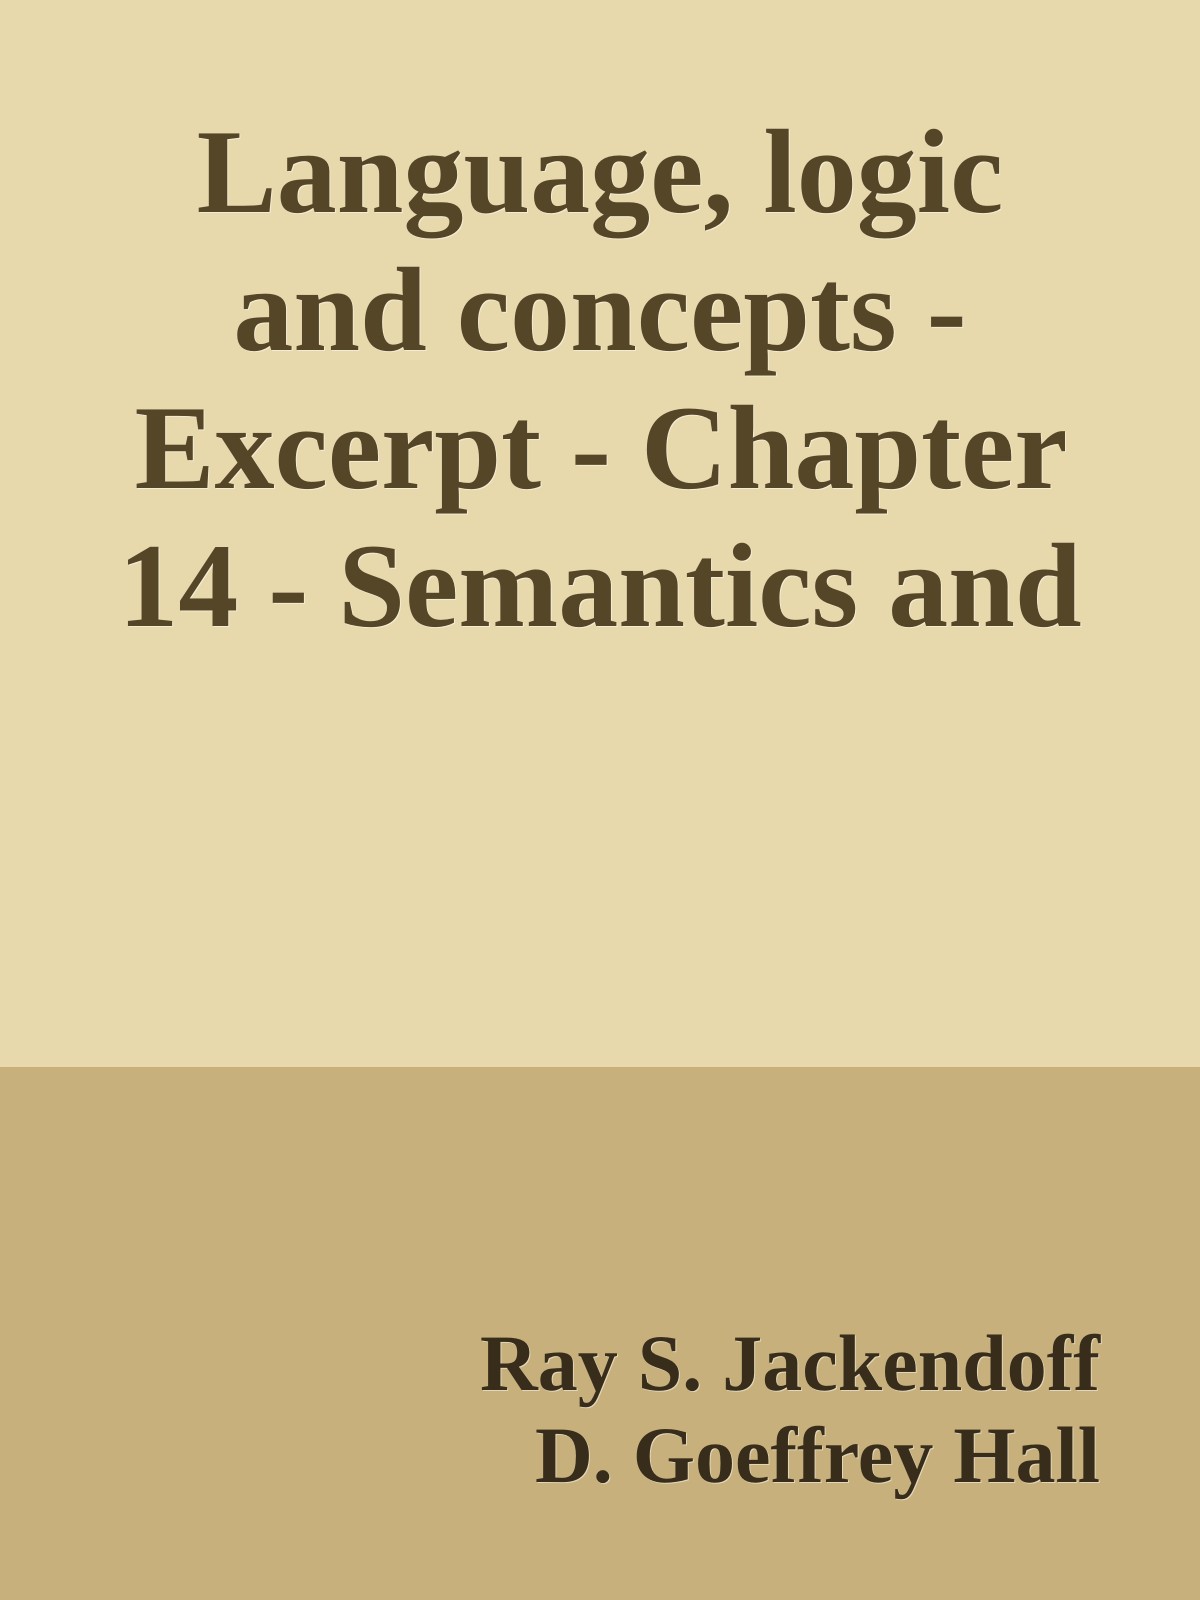 Language, logic and concepts - Excerpt - Chapter 14 - Semantics and the Aquisition of Proper Names